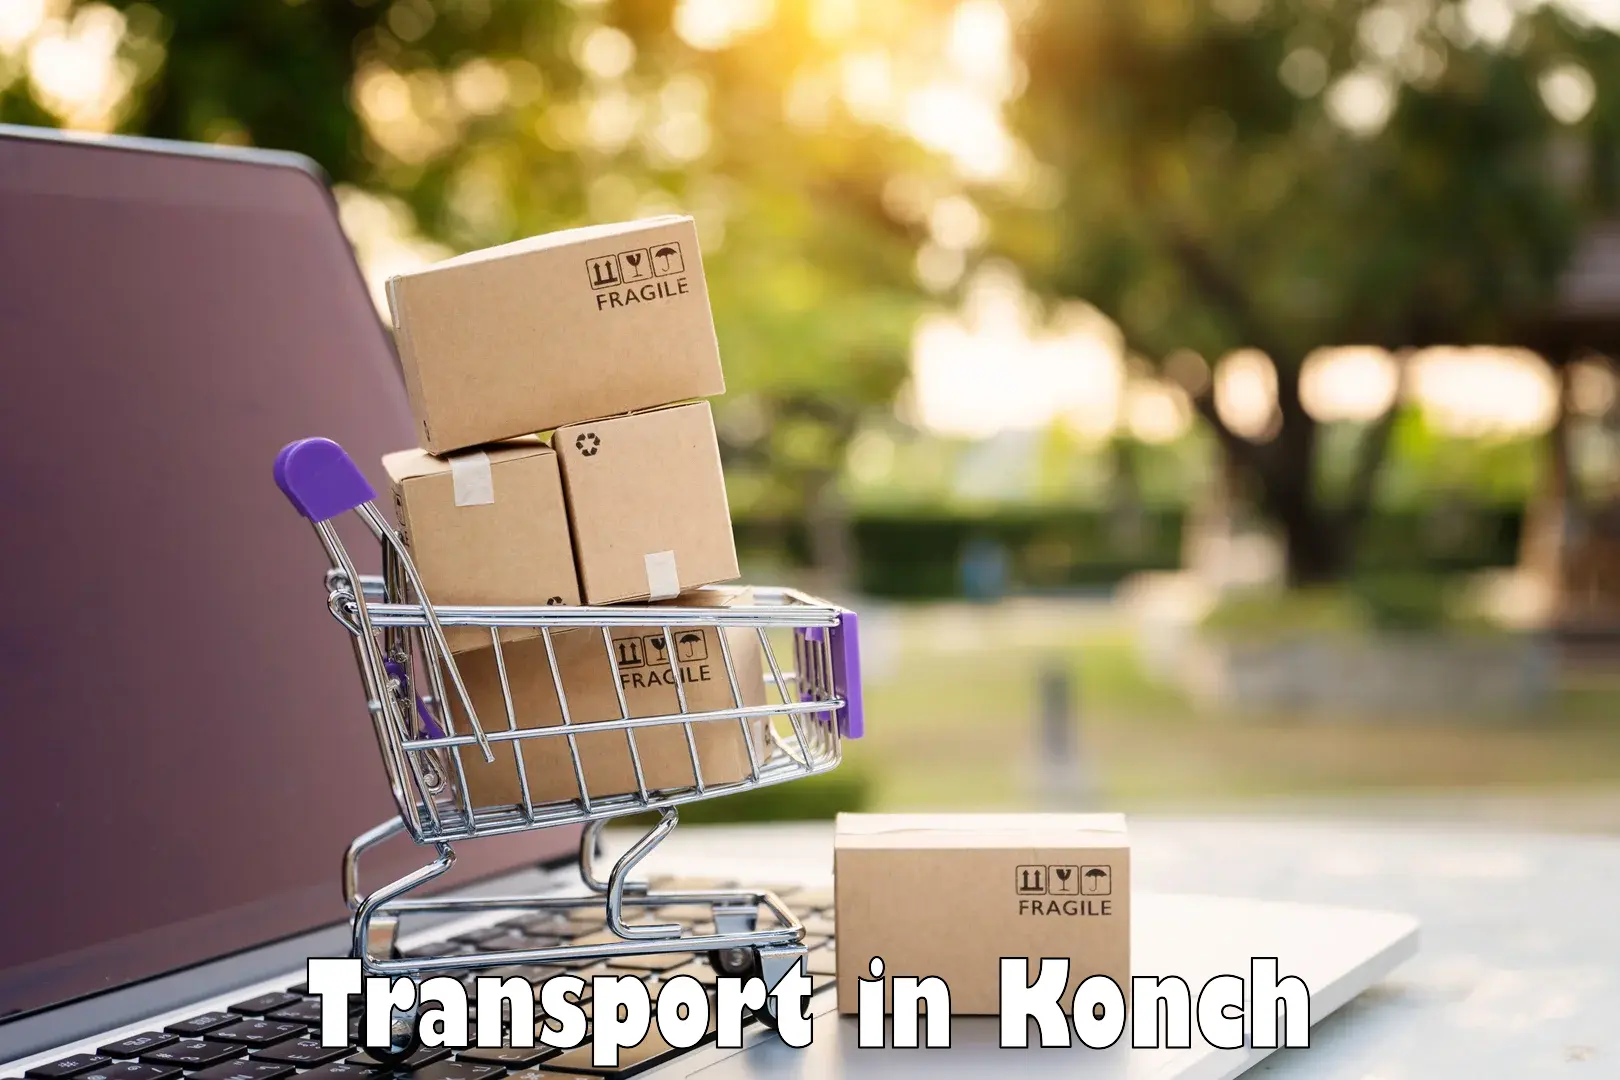 Daily parcel service transport in Konch